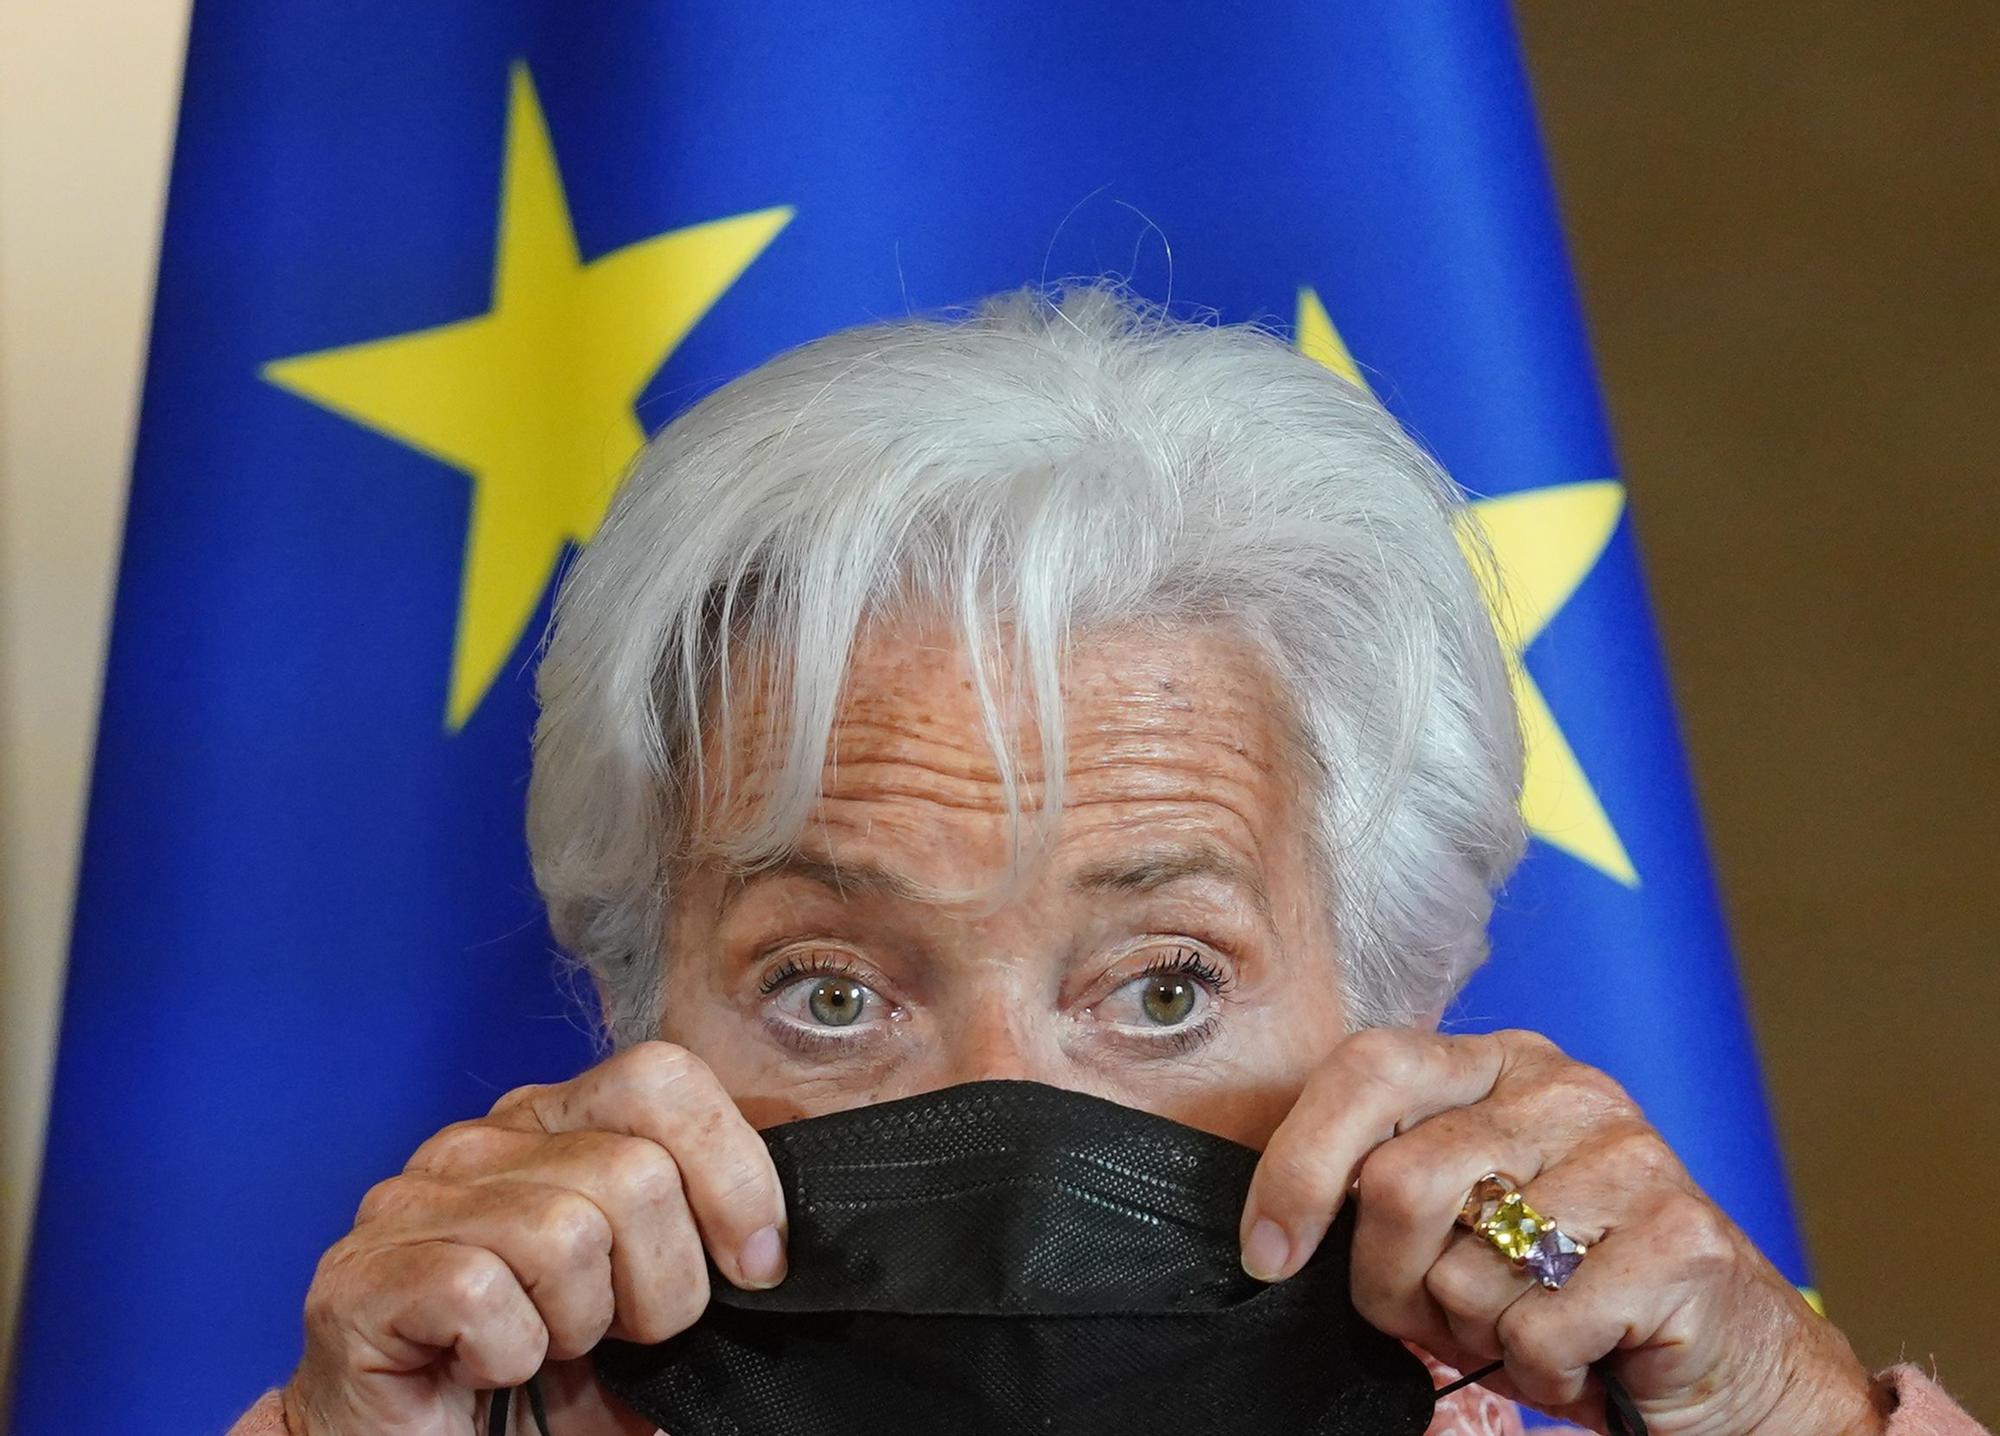 Archivo - FILED - 27 April 2022, Hamburg: Christine Lagarde, President of the European Central Bank (ECB), puts on an FFP2 mask after being greeted at City Hall. Photo: Marcus Brandt/dpa  27/04/2022 FILED - 27 April 2022, Hamburg: Christine Lagarde, President of the European Central Bank (ECB), puts on an FFP2 mask after being greeted at City Hall. Photo: Marcus Brandt/dpa ECONOMIA INTERNACIONAL Marcus Brandt/dpa  Marcus Brandt/dpa - Archivo